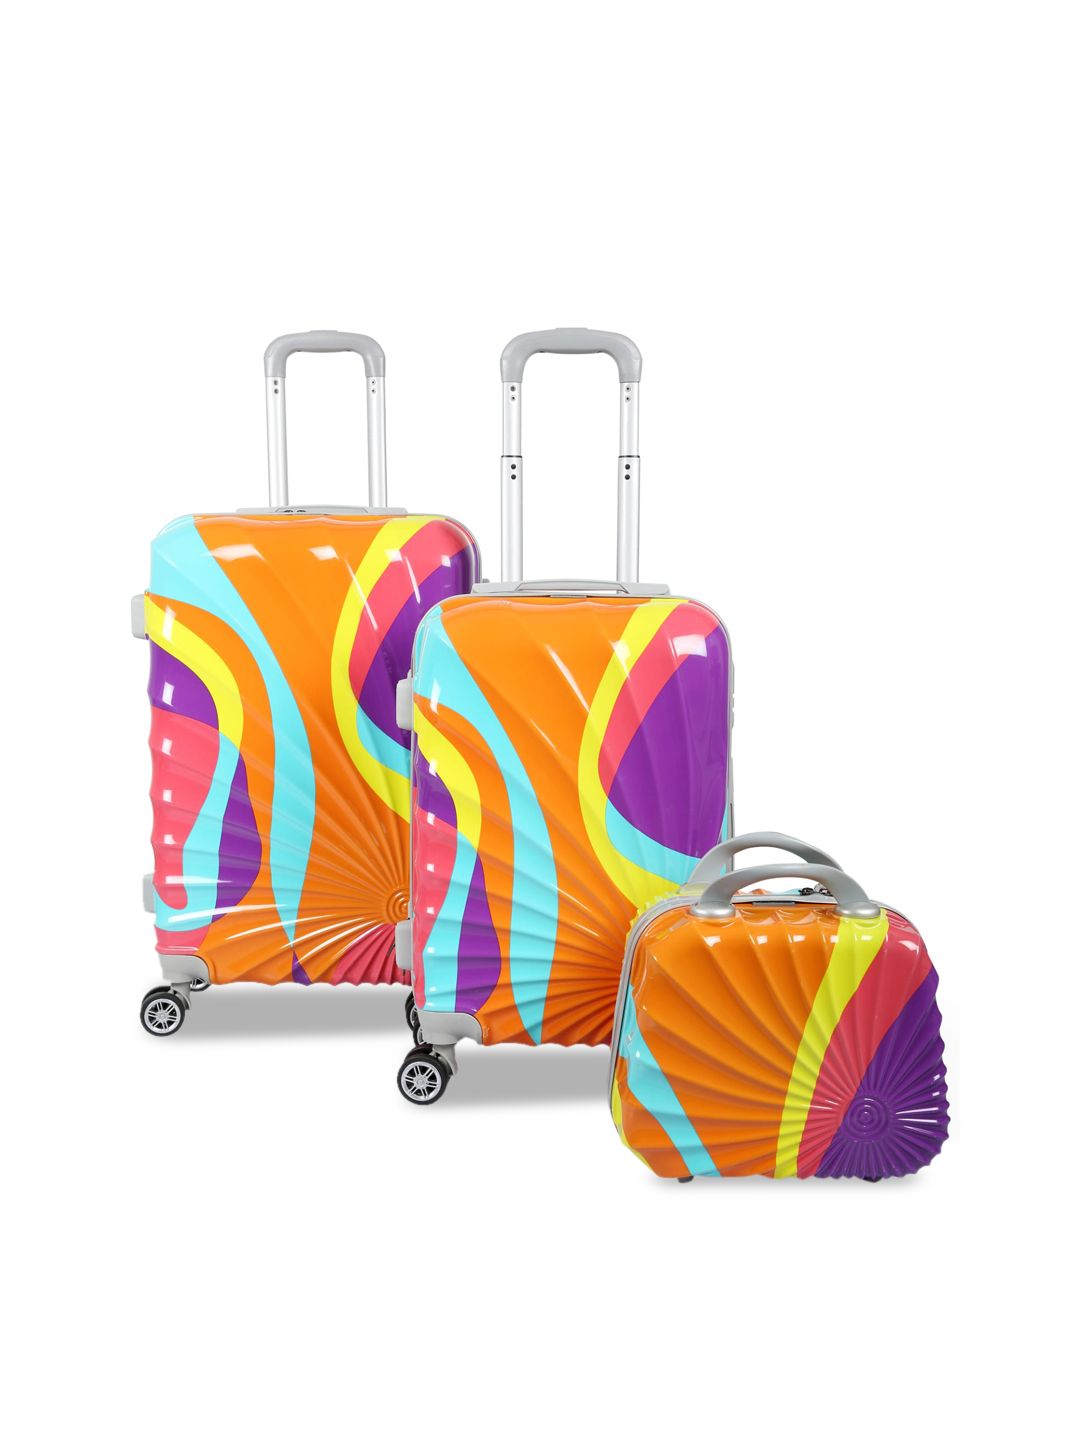 Polo Class Unisex Set of 3 Multicoloured Printed Travel Bags Price in India